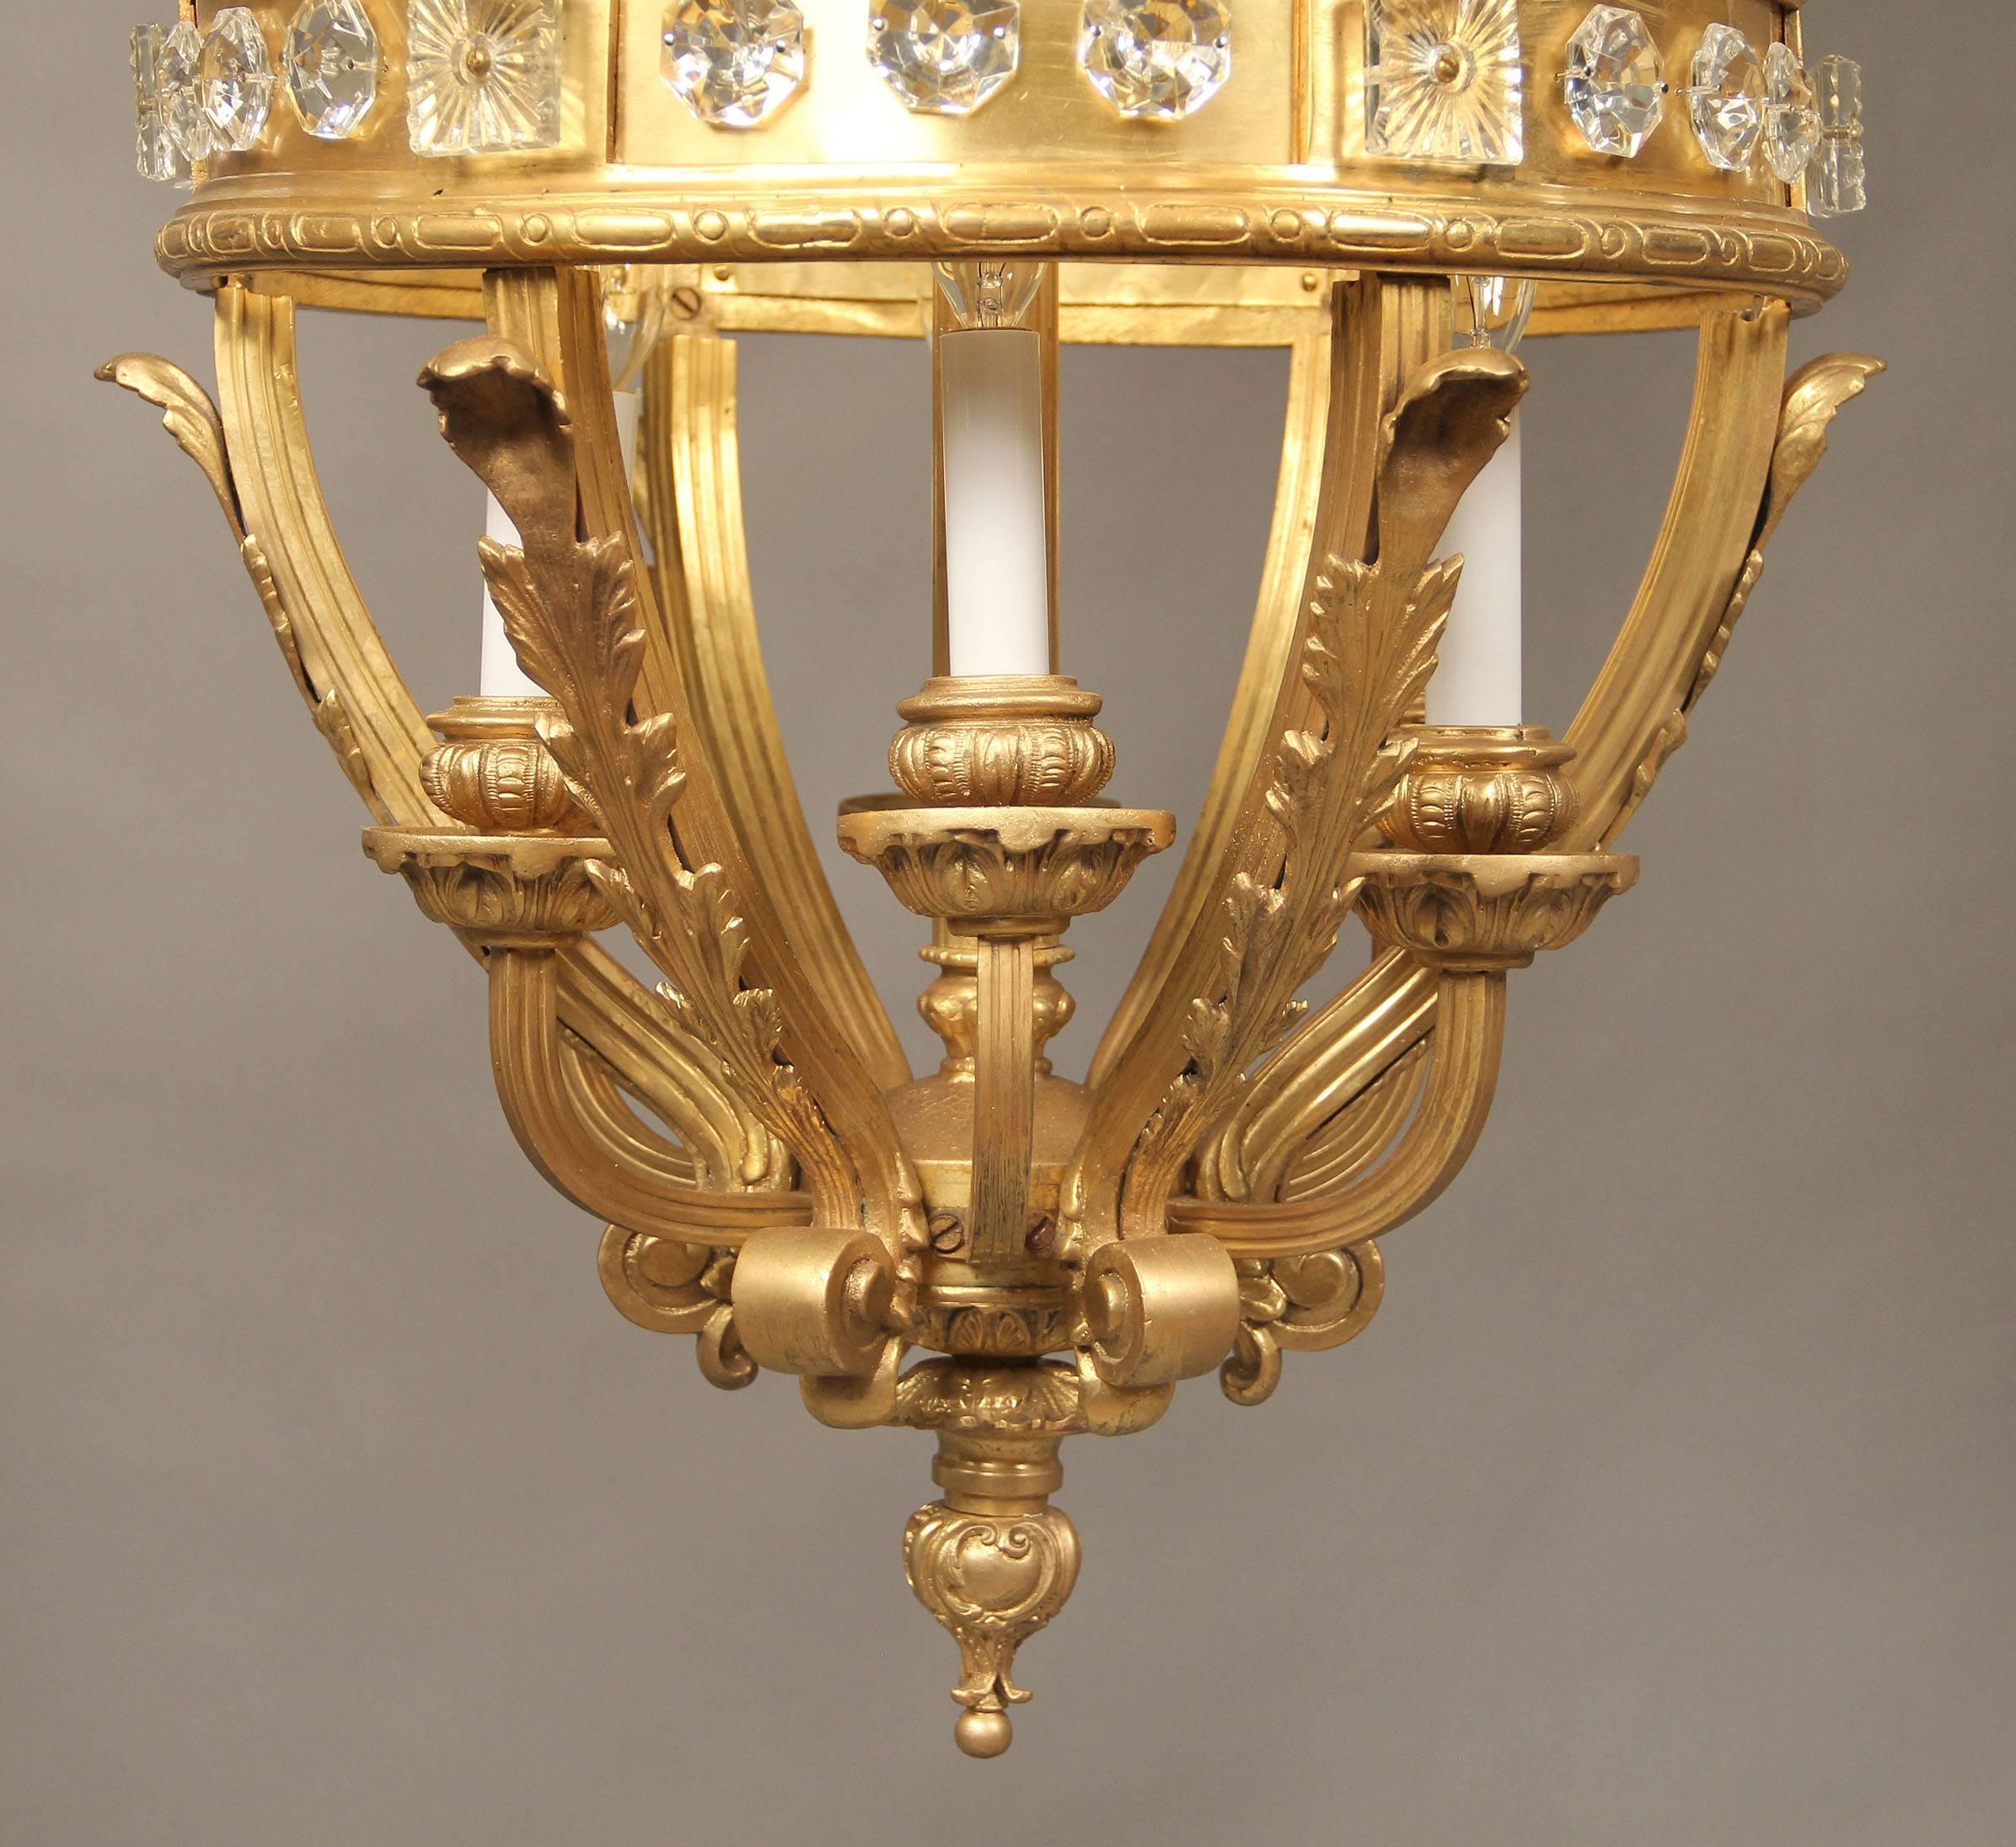 Monumental Late 19th Century Gilt Bronze and Crystal Twelve-Light Lantern In Good Condition For Sale In New York, NY